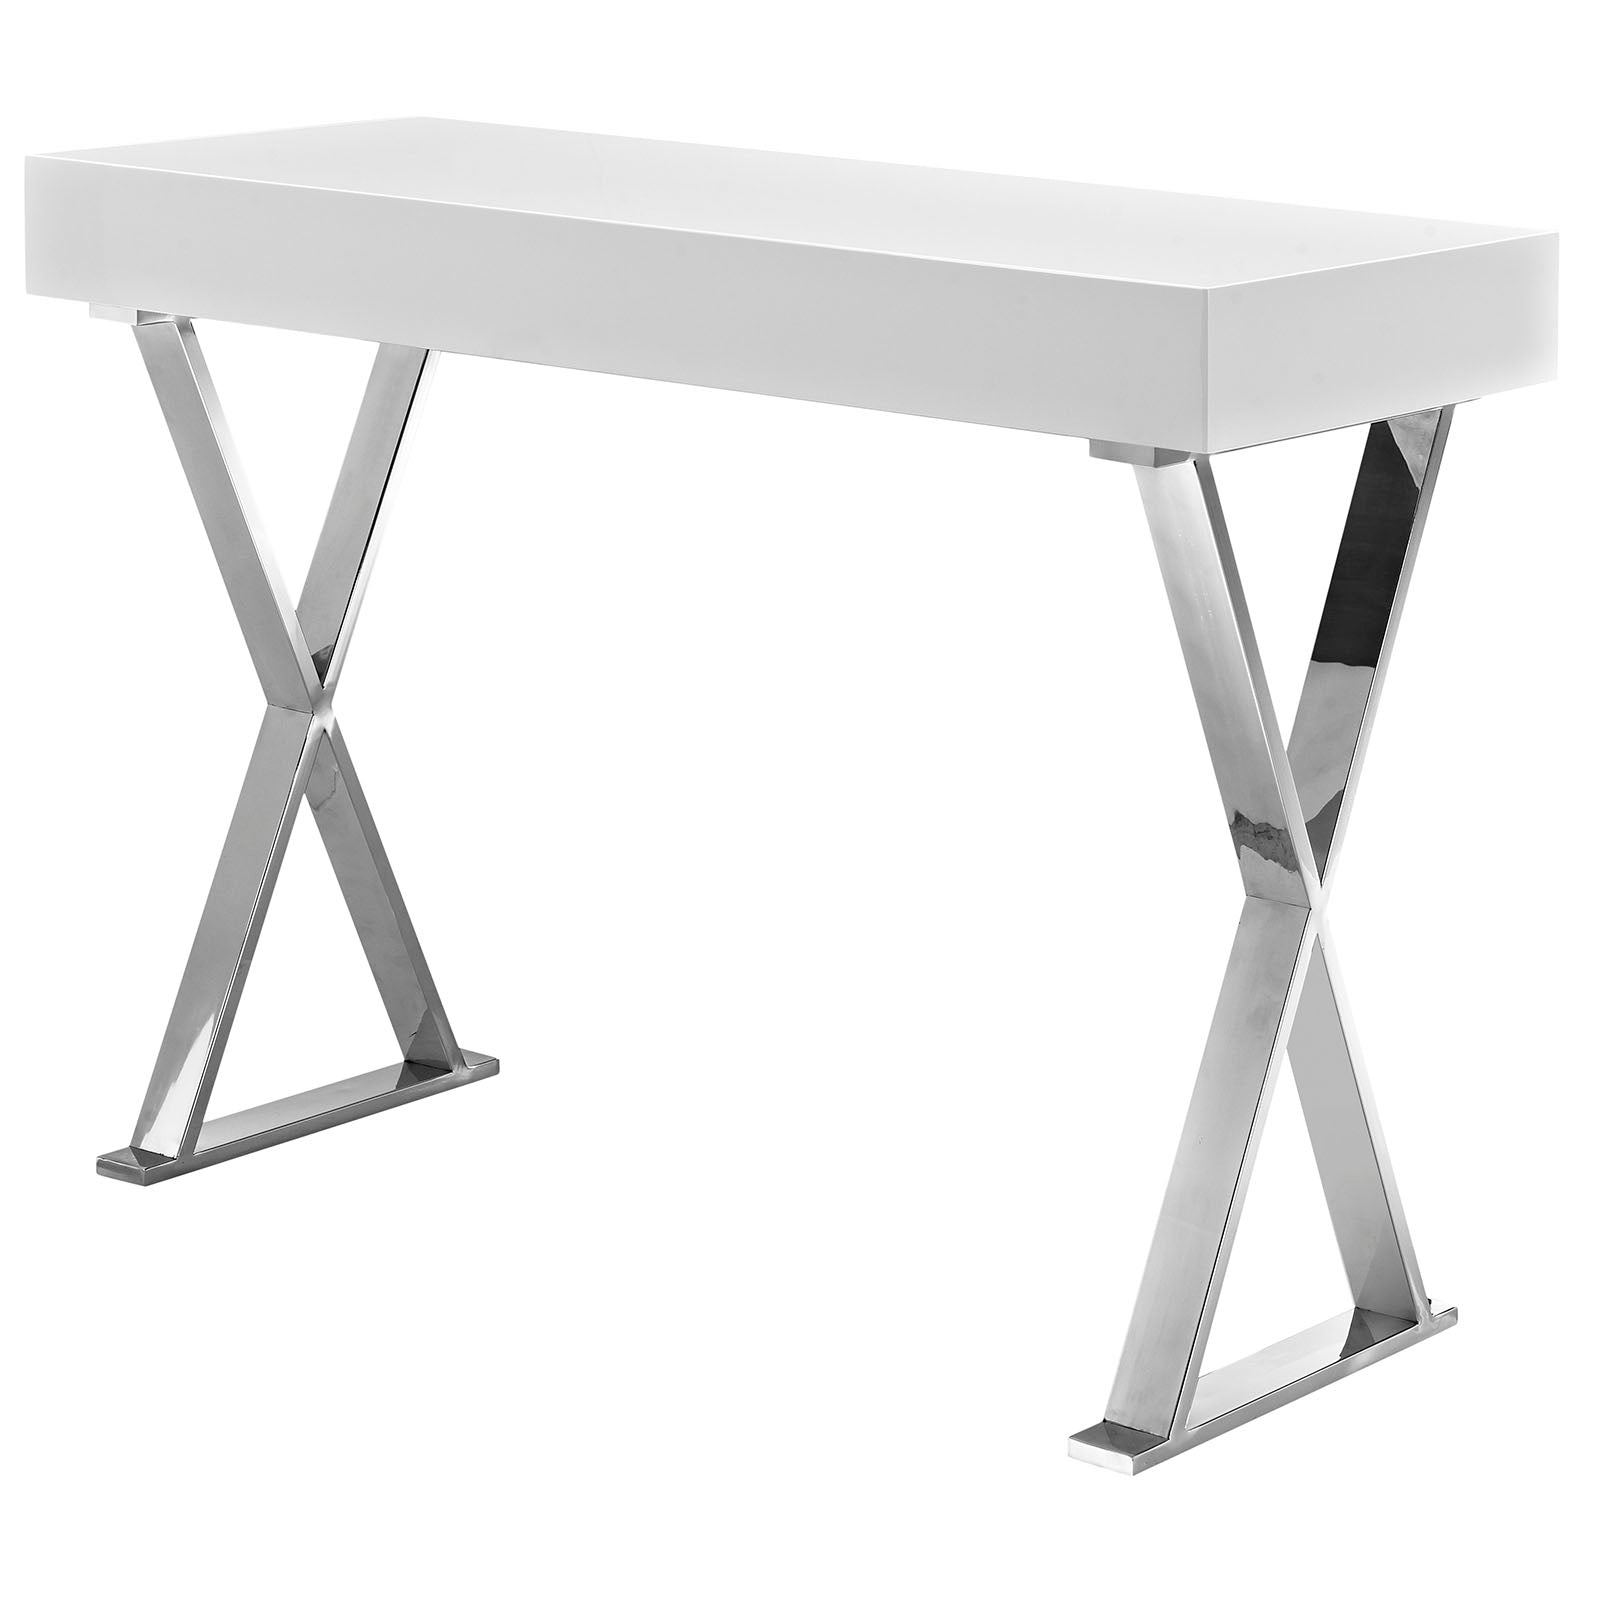 Sector Console Table - East Shore Modern Home Furnishings